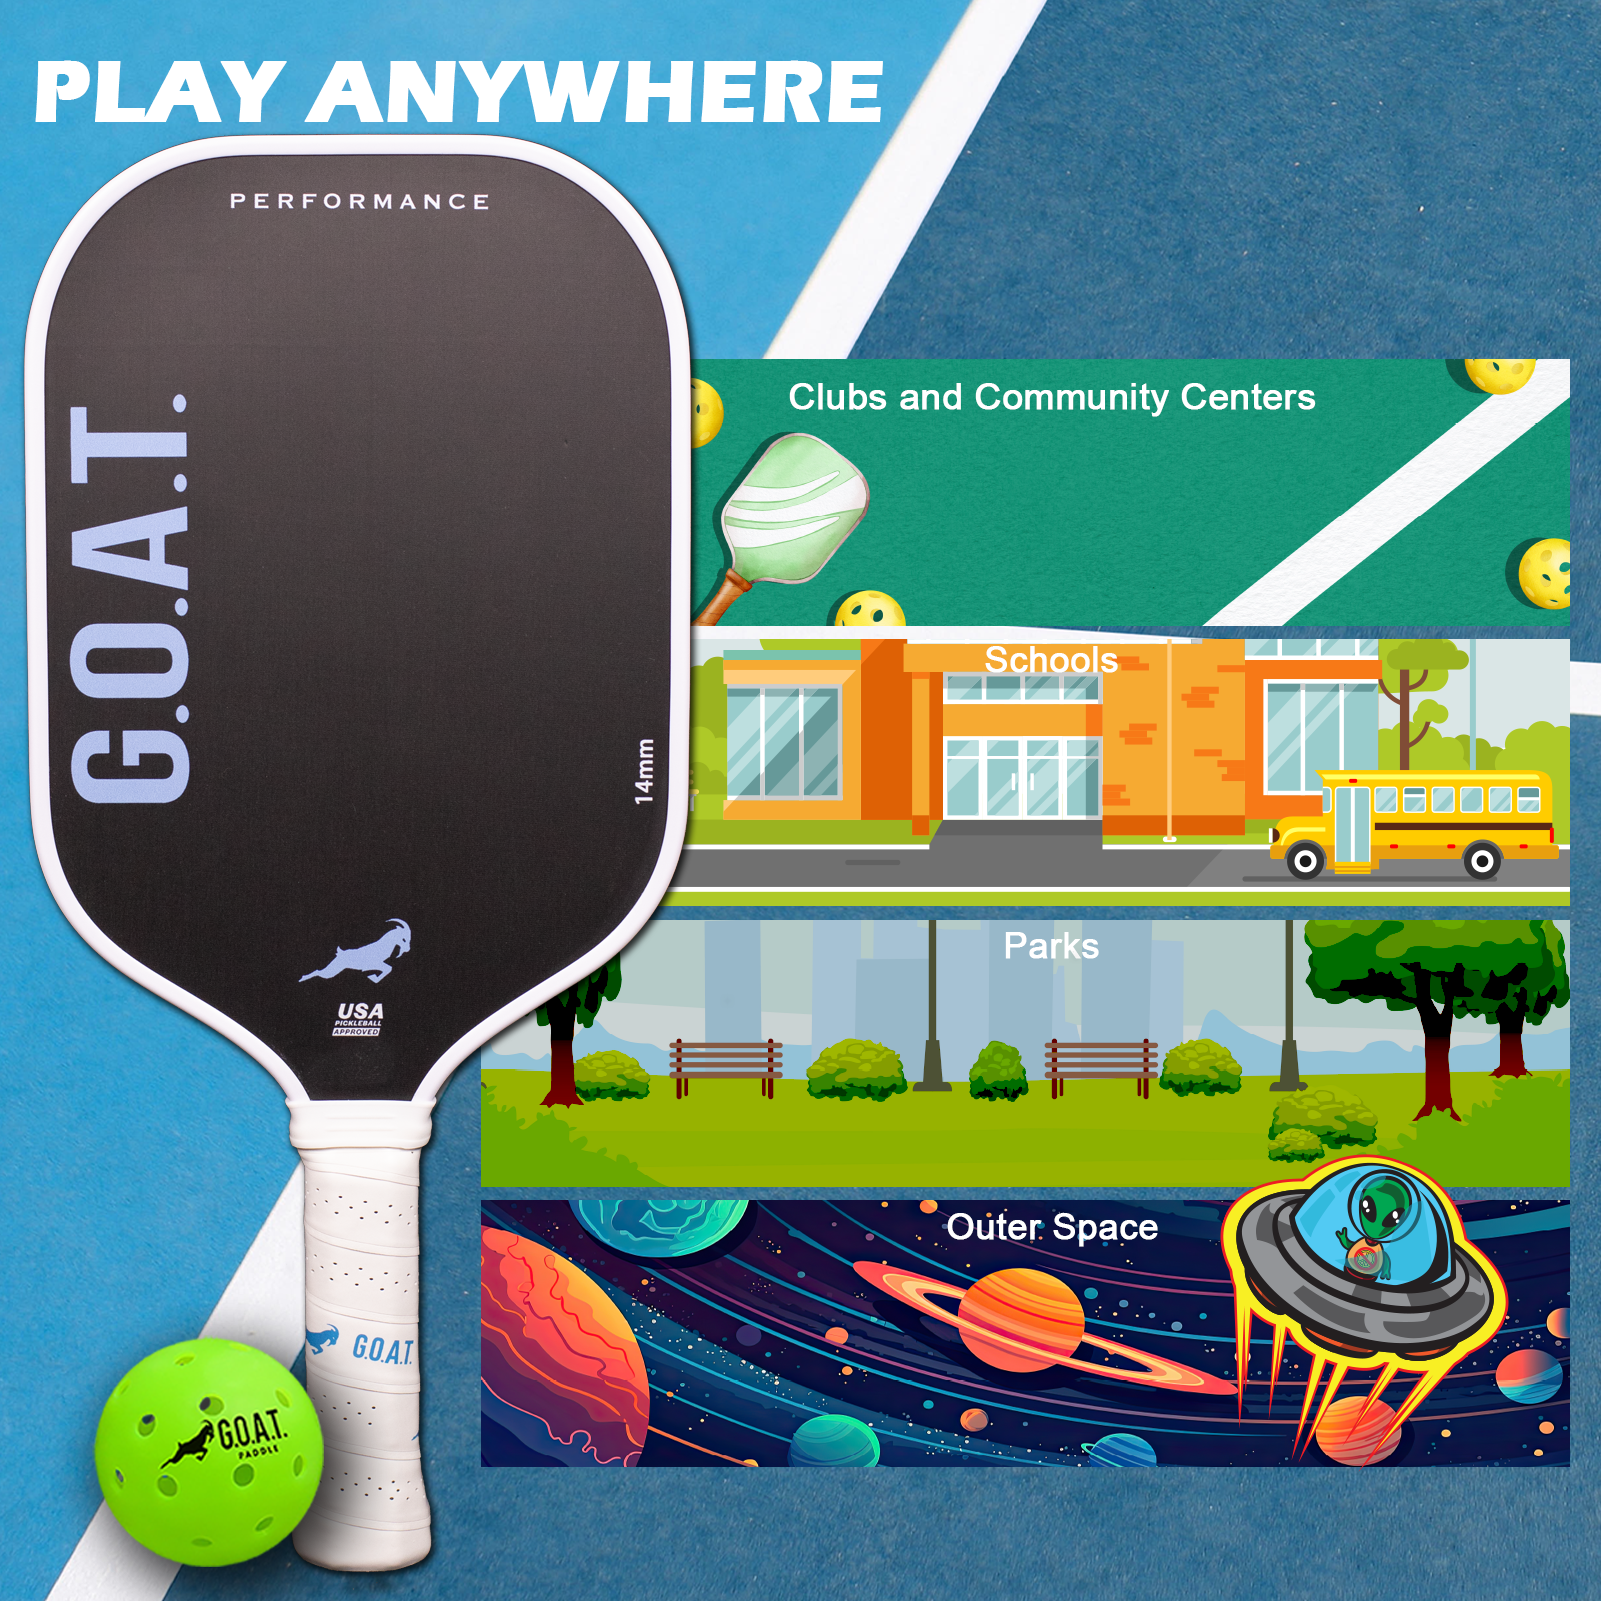 Goat Performance poster: Paddle & ball in a gym with lab, space, park scenes. Green/blue theme, 'AND Lupine', 'community center, beachclub'.